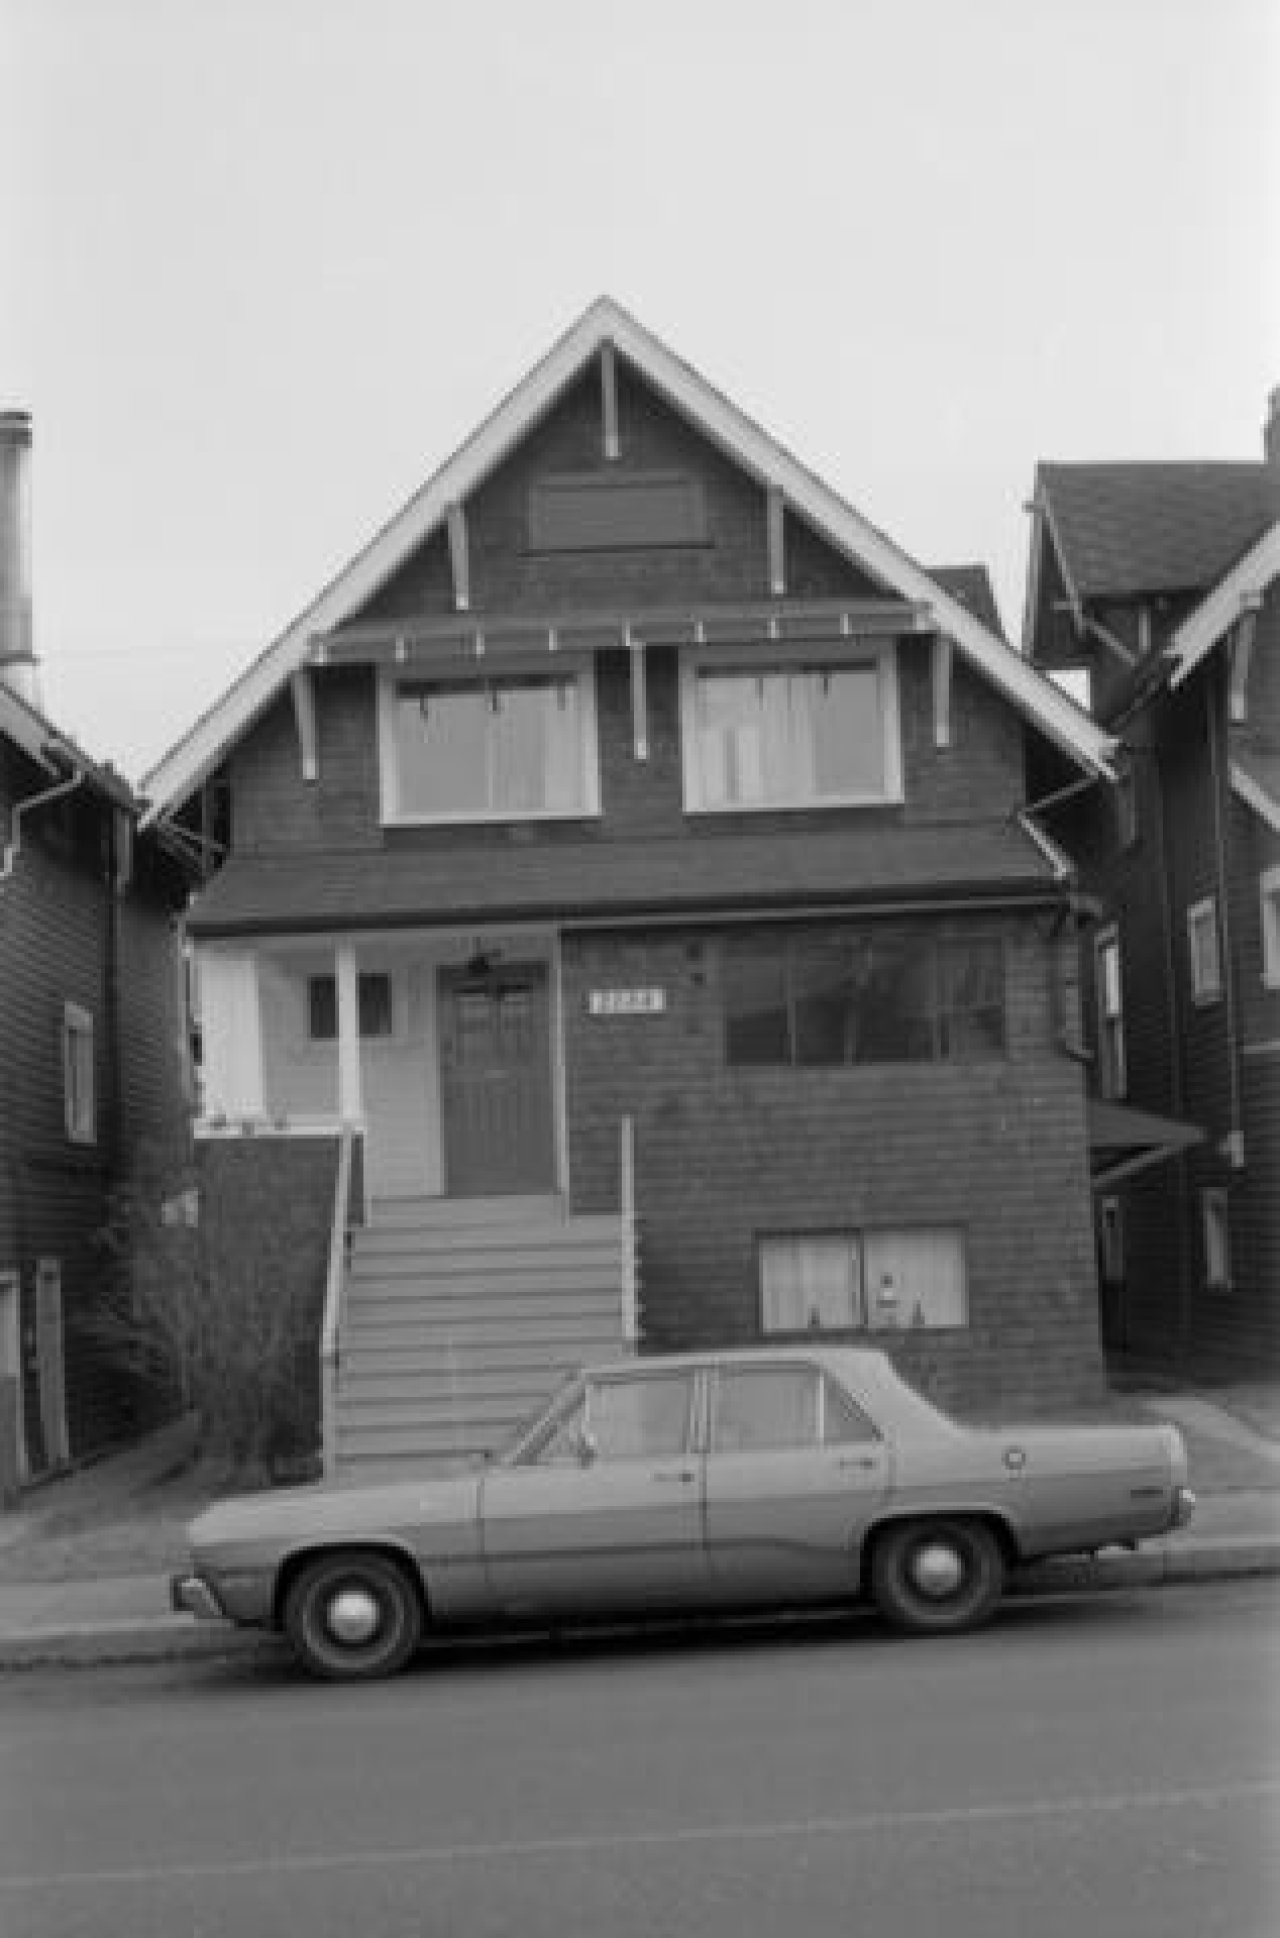 2134 MacDonald St in 1985. Source: City of Vancouver Archives 791 0746_141